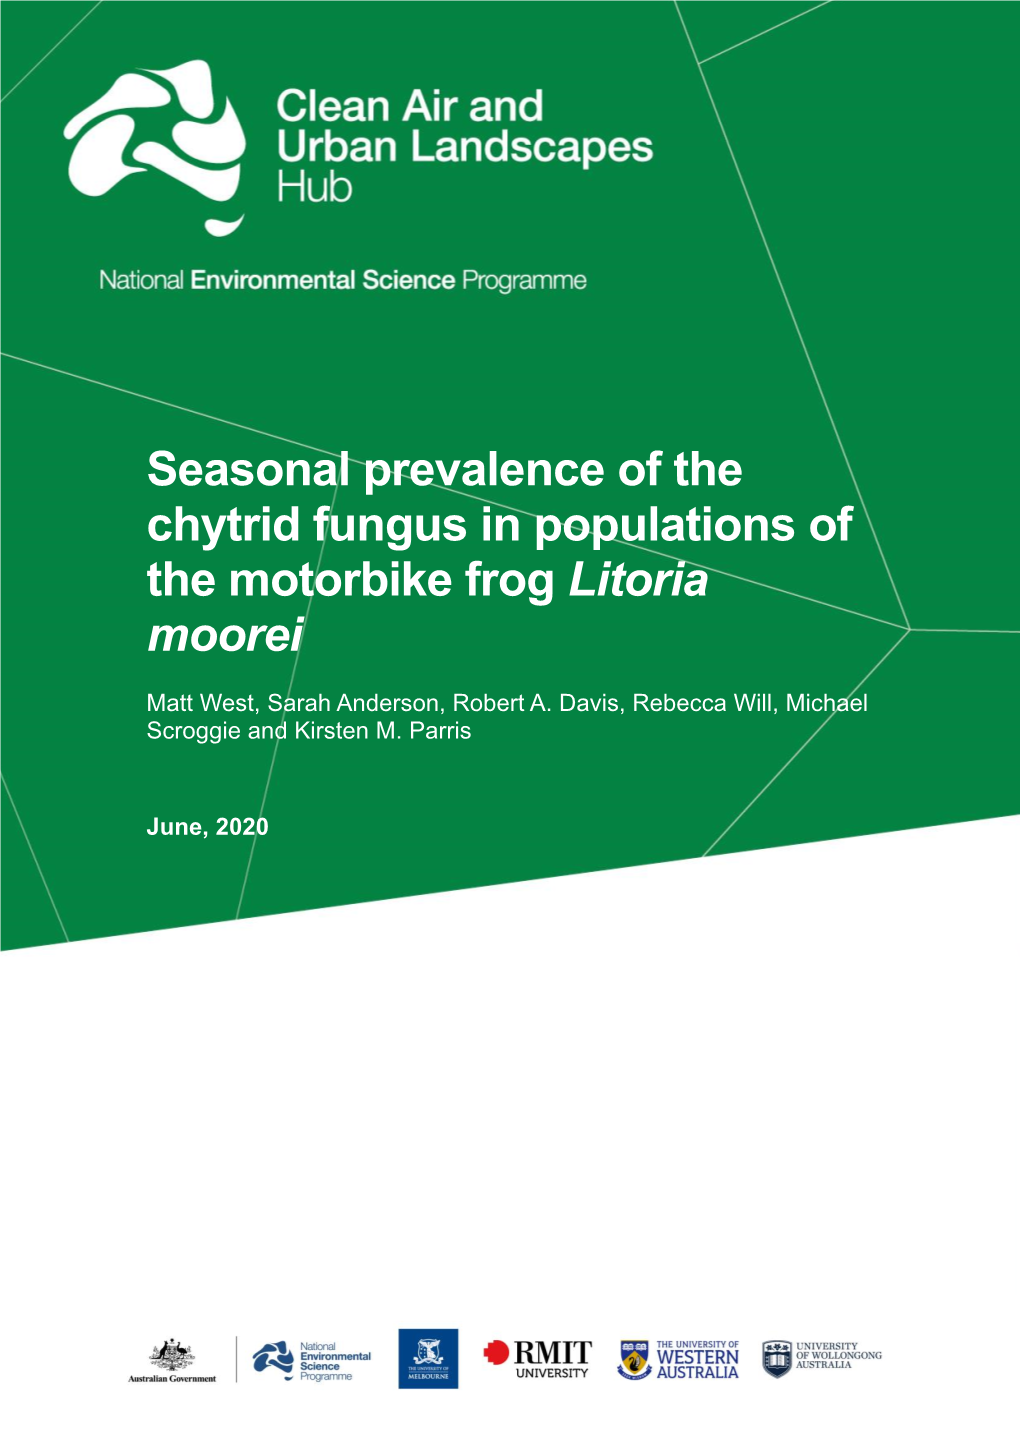 Seasonal Prevalence of the Chytrid Fungus in Populations of the Motorbike Frog Litoria Moorei